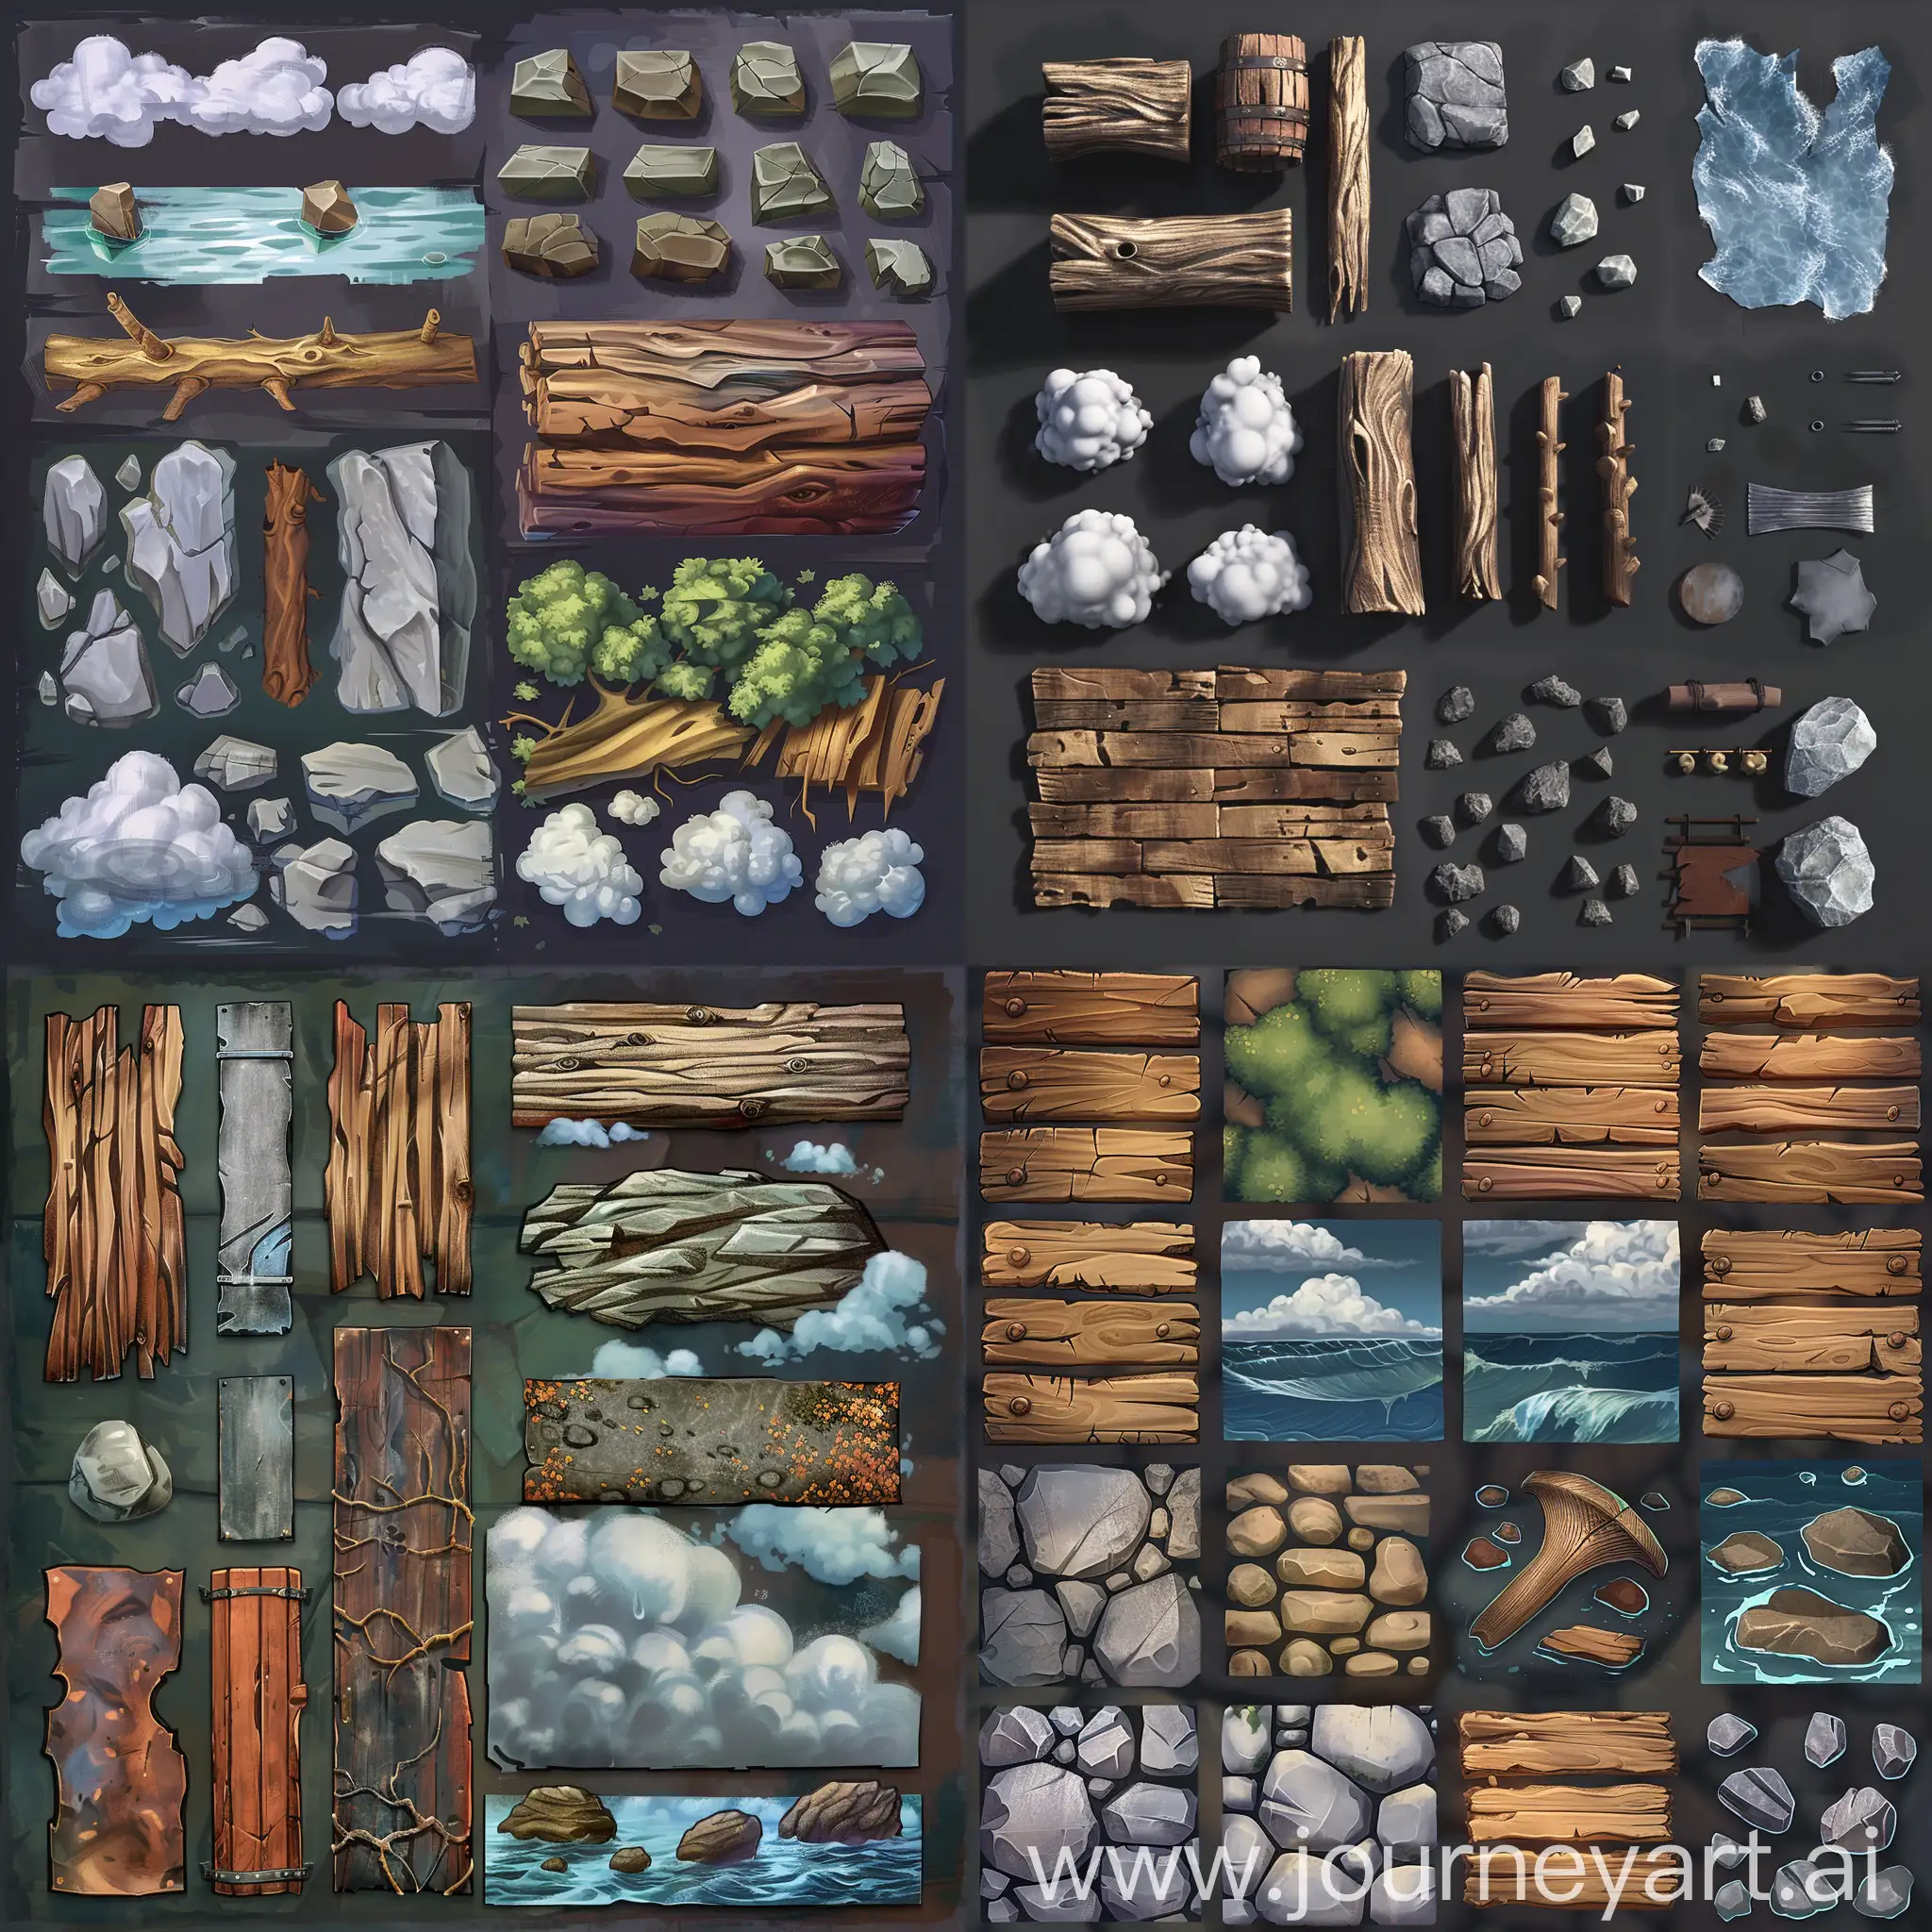 make texture set like a long dark game. painted style. woods, rocks, water, clouds and some metals. stylized style like a long dark videogame.